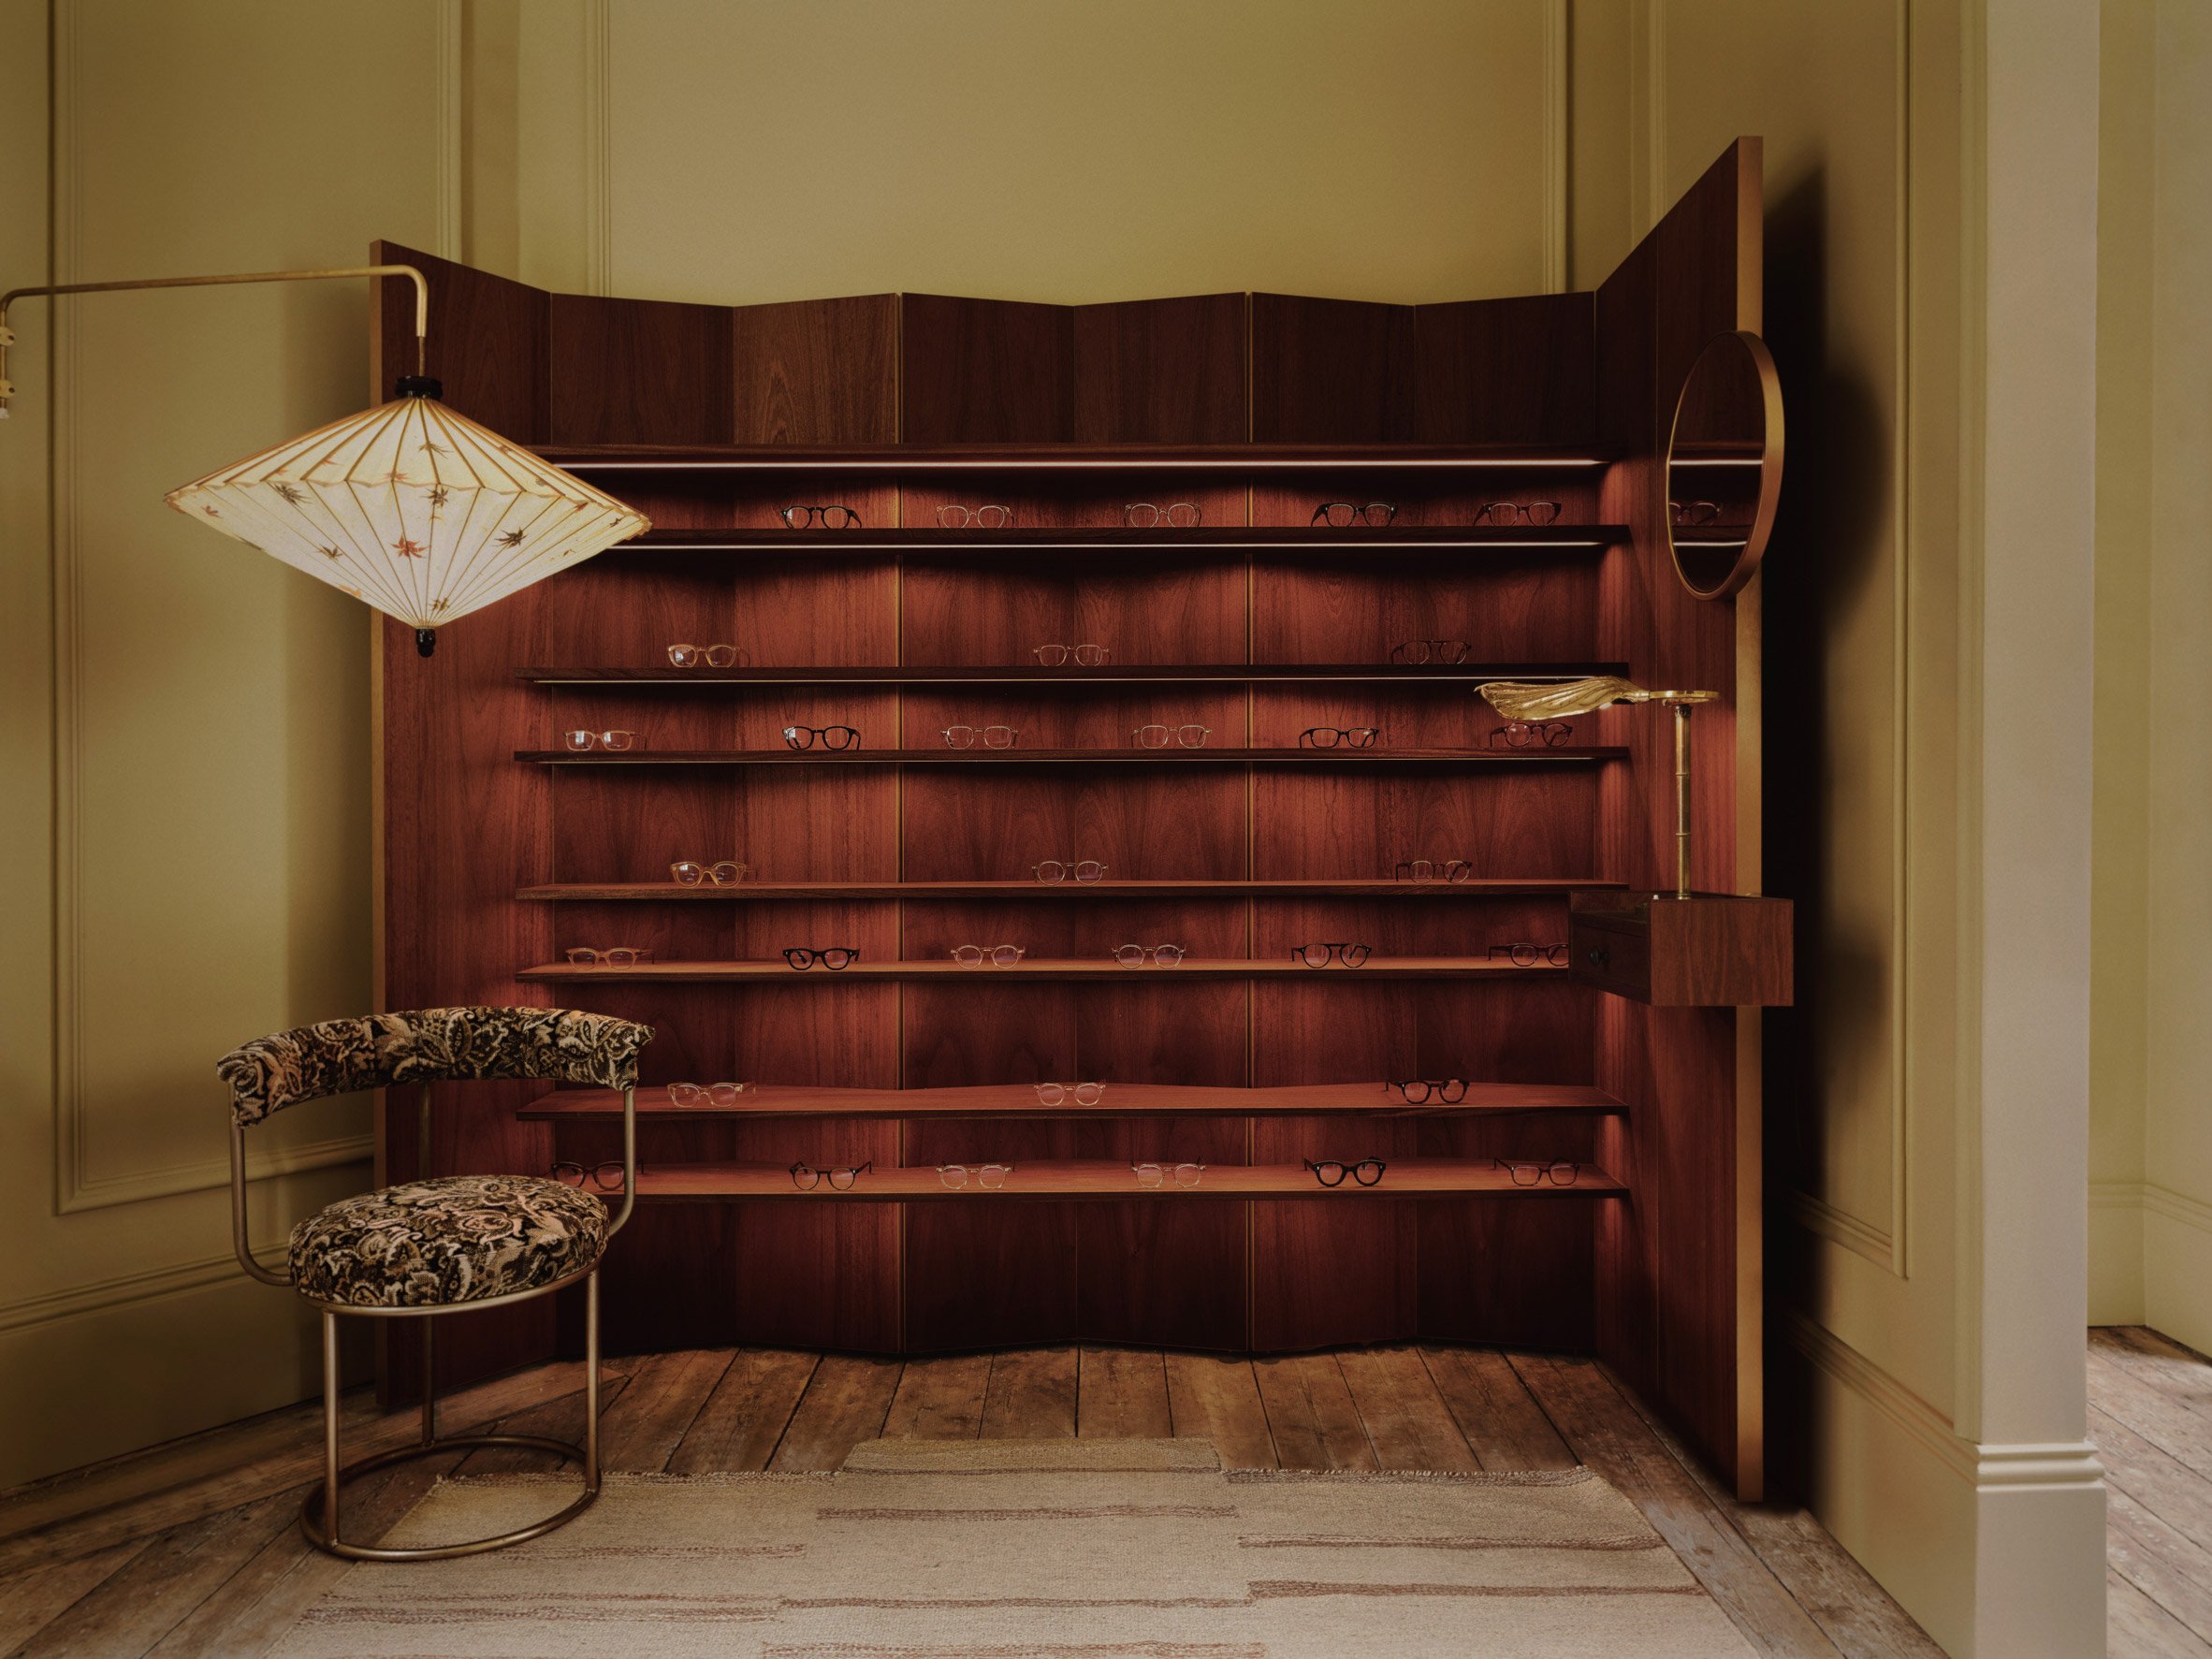 Mahogany display stand in eyewear shop designed by Child Studio